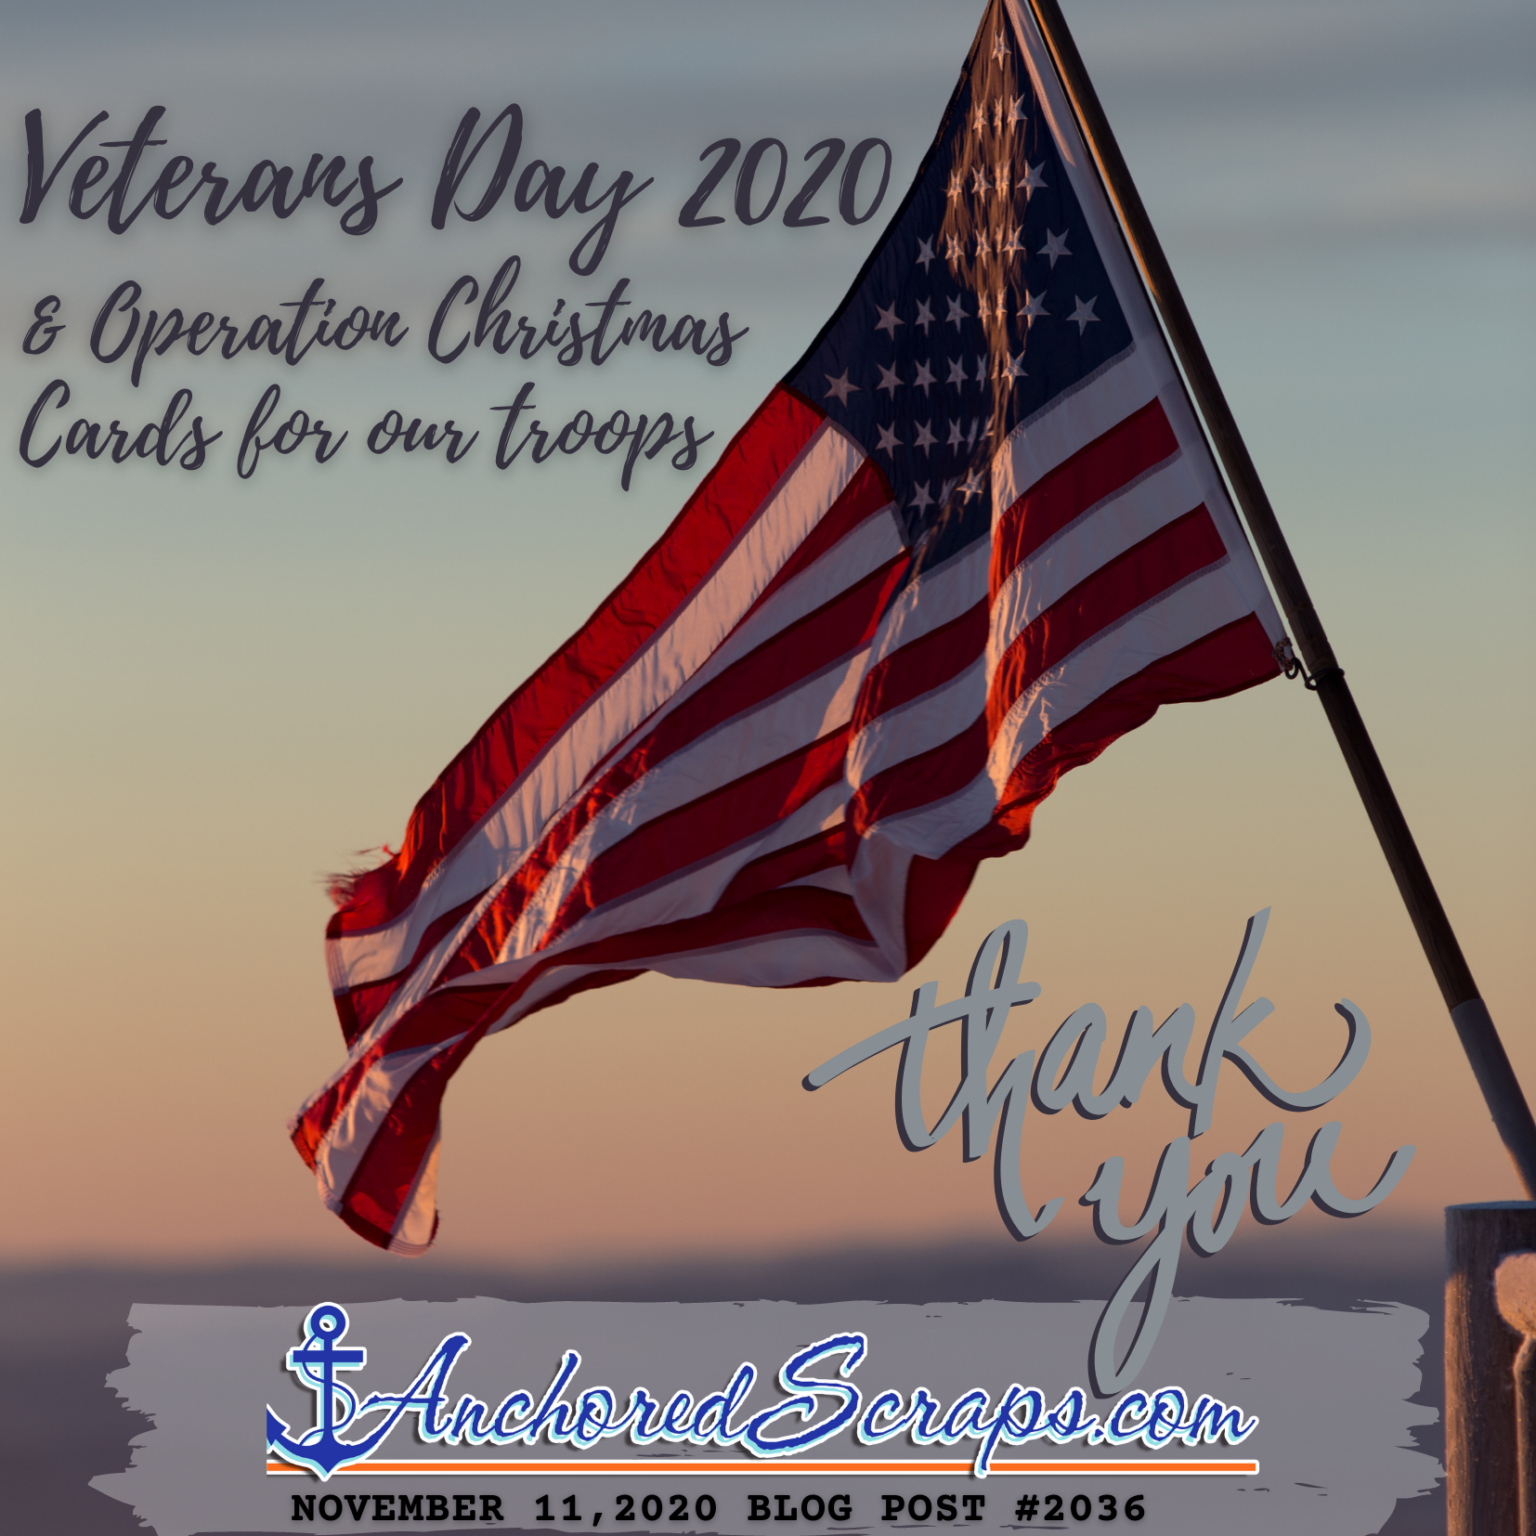 Veterans Day 2020 & Operation Christmas Cards for Our Troops